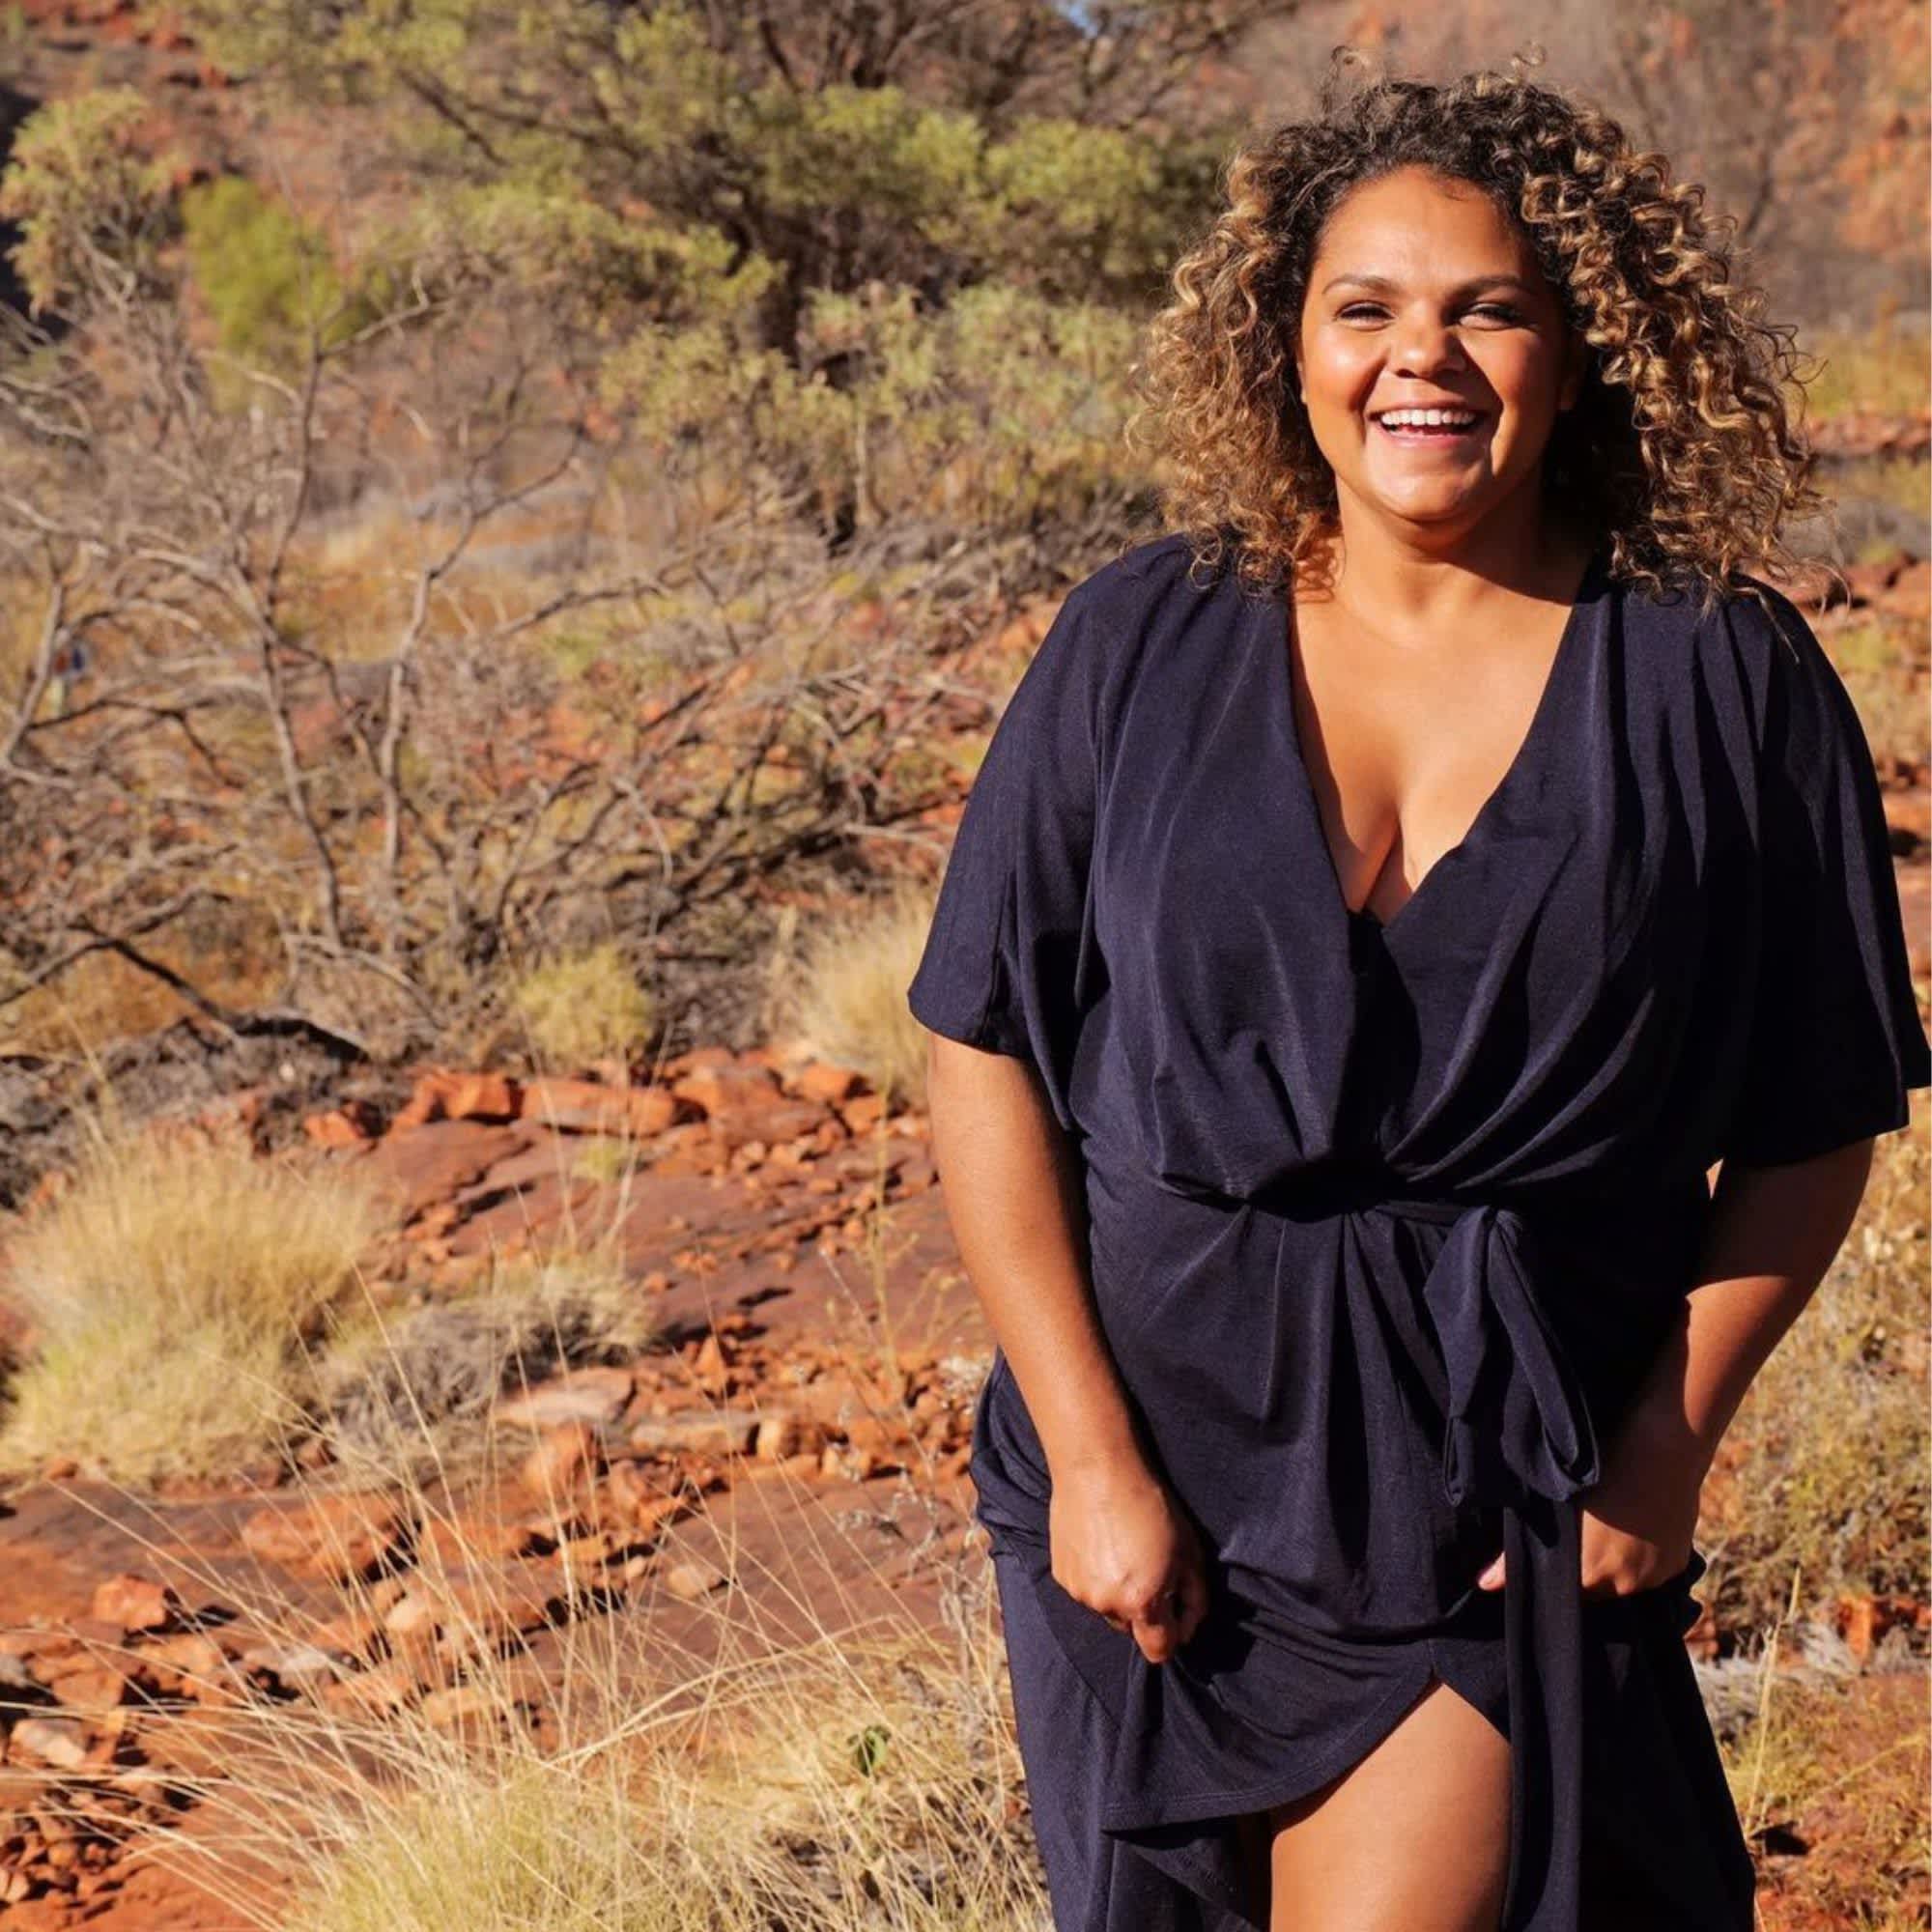 Aboriginal Actress Rarriwuy Hick on Growing Up in Two Different Worlds pic